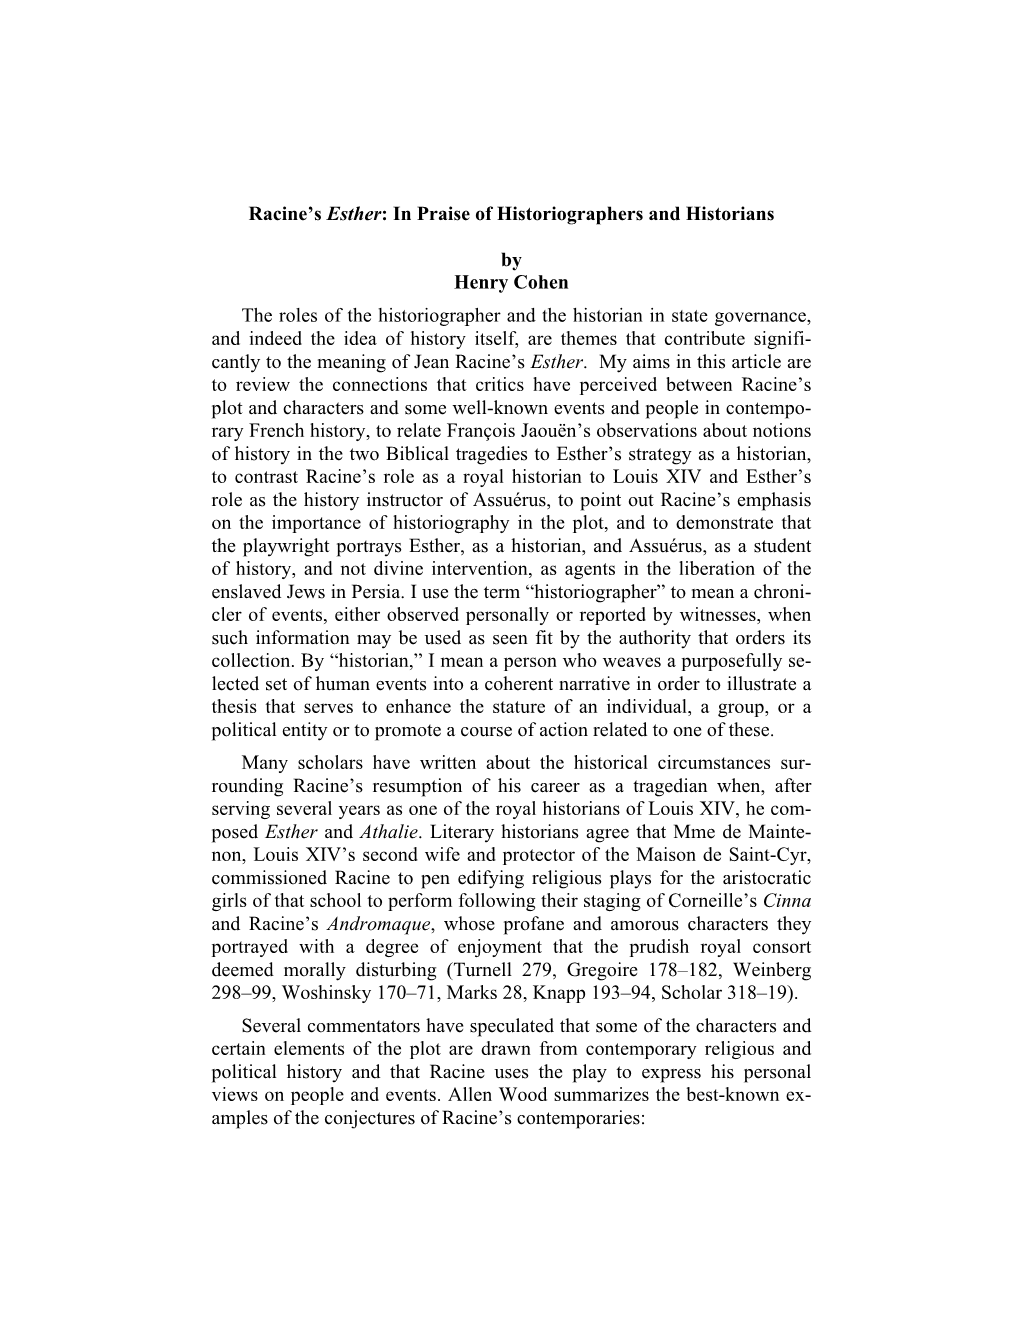 Racine's Esther: in Praise of Historiographers and Historians by Henry Cohen the Roles of the Historiographer and the Historia